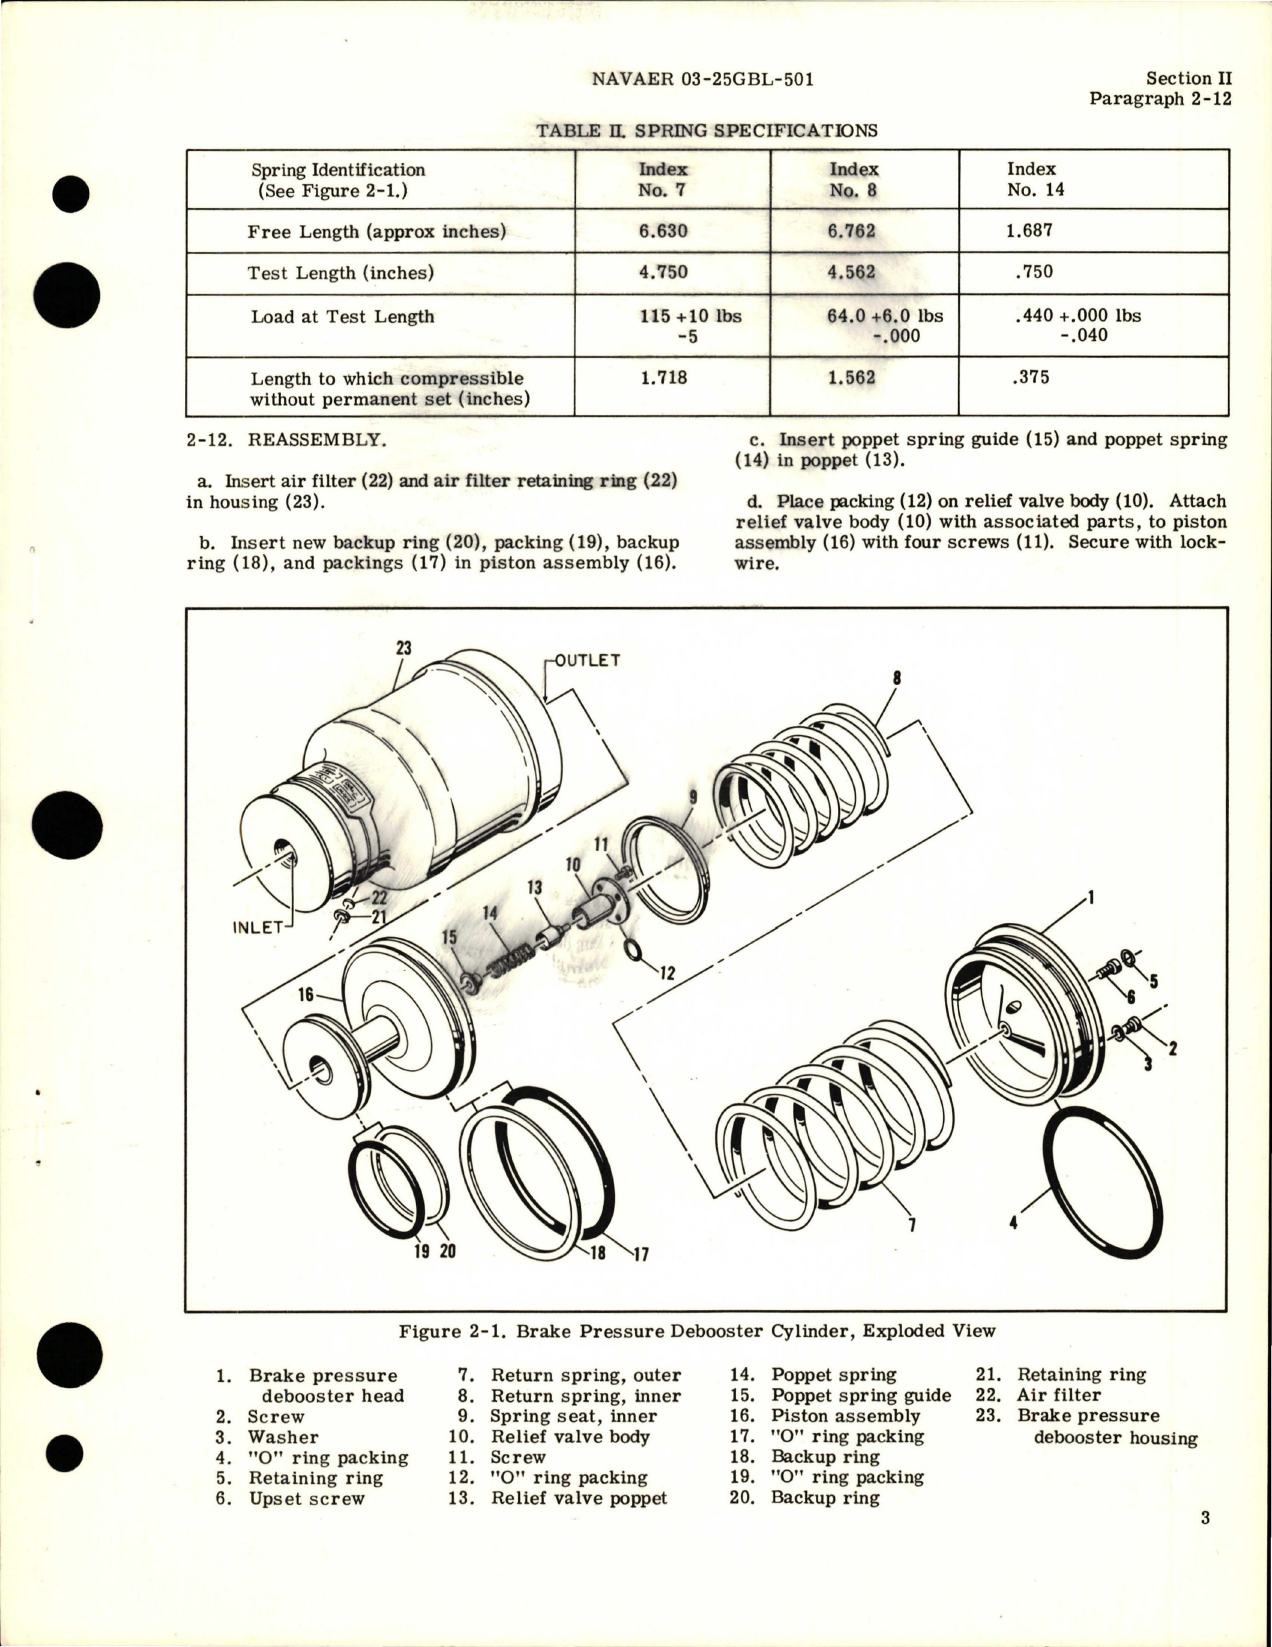 Sample page 5 from AirCorps Library document: Overhaul Instructions for Brake Pressure Debooster Cylinder - Part K4512-1